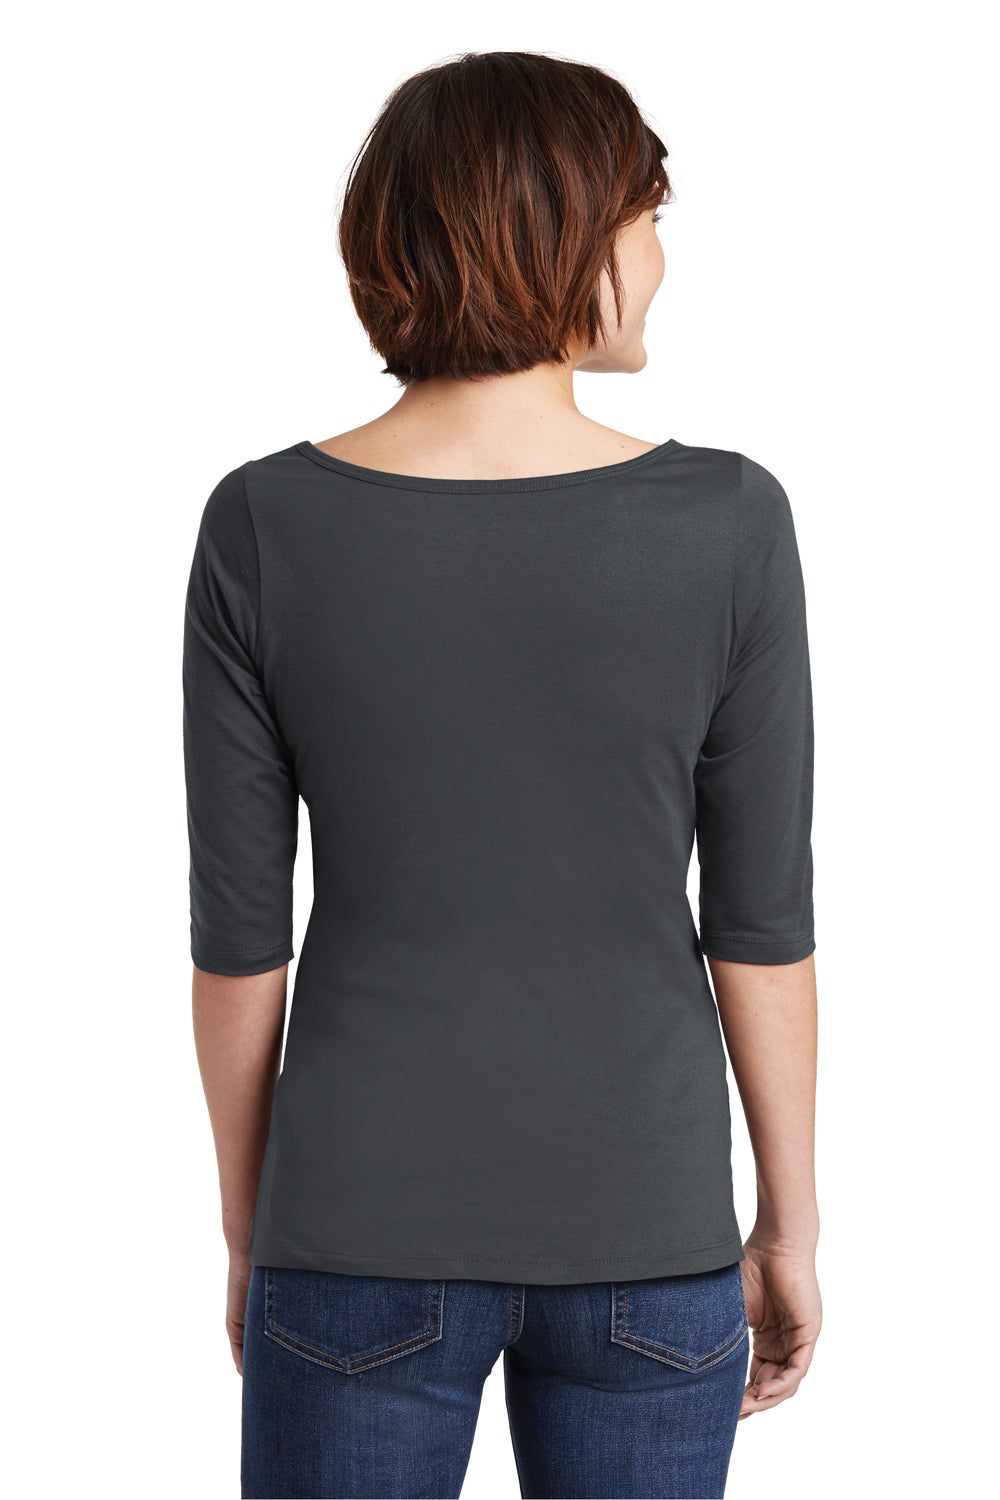 District DM107L Womens Perfect Weight 3/4 Sleeve T-Shirt Charcoal Grey Back